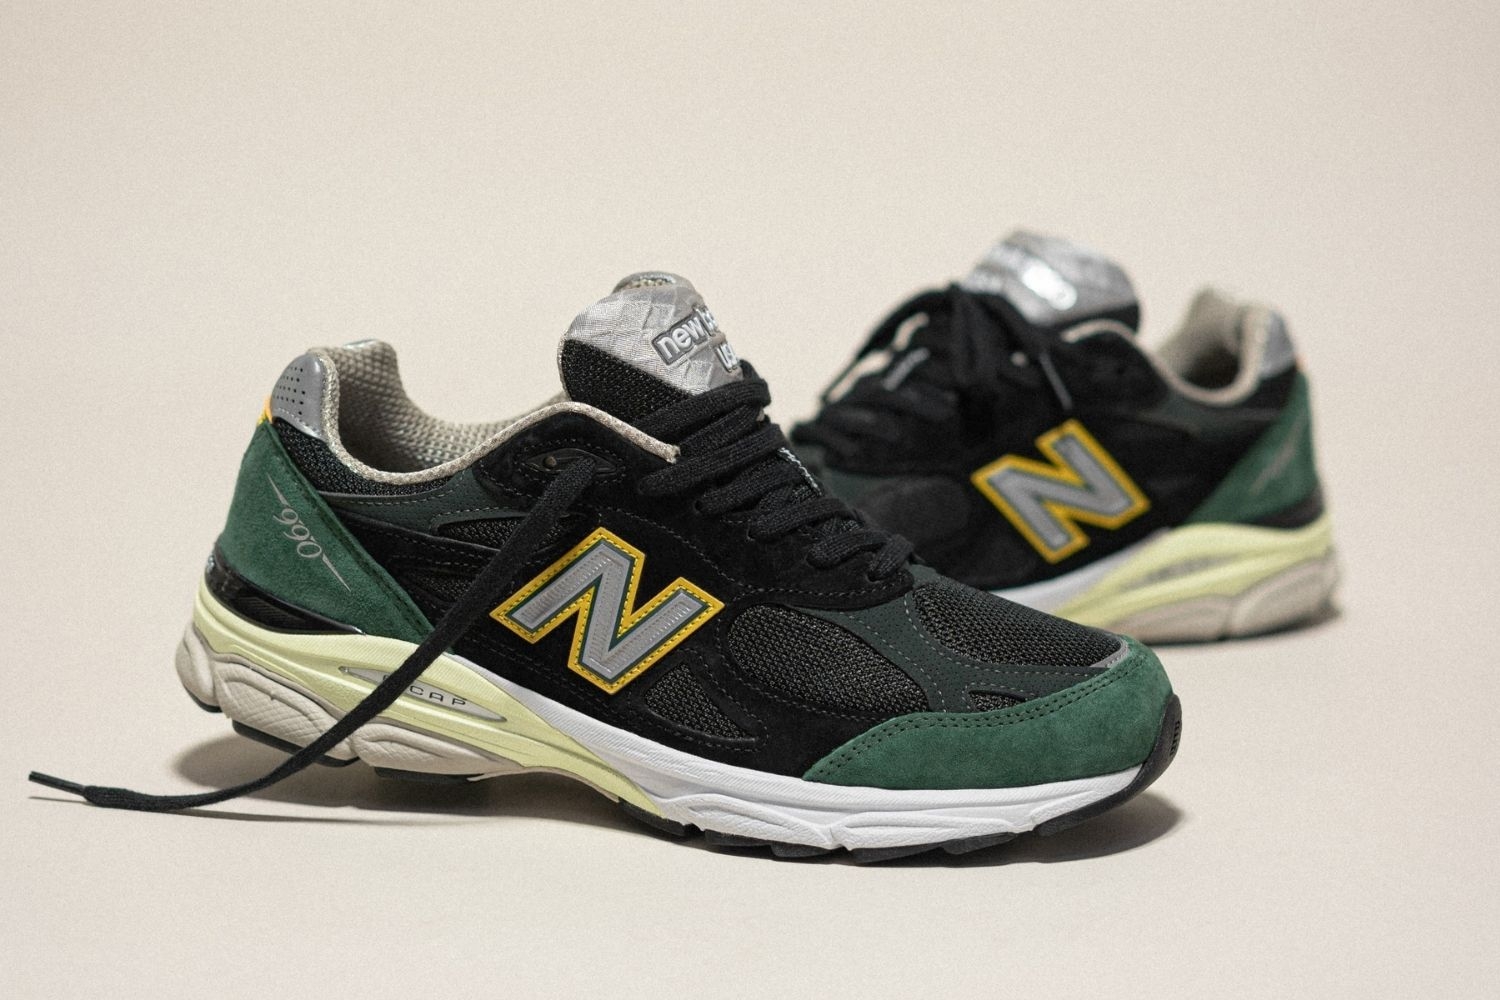 New Balance 990v3 Made In USA 'Green' is now available